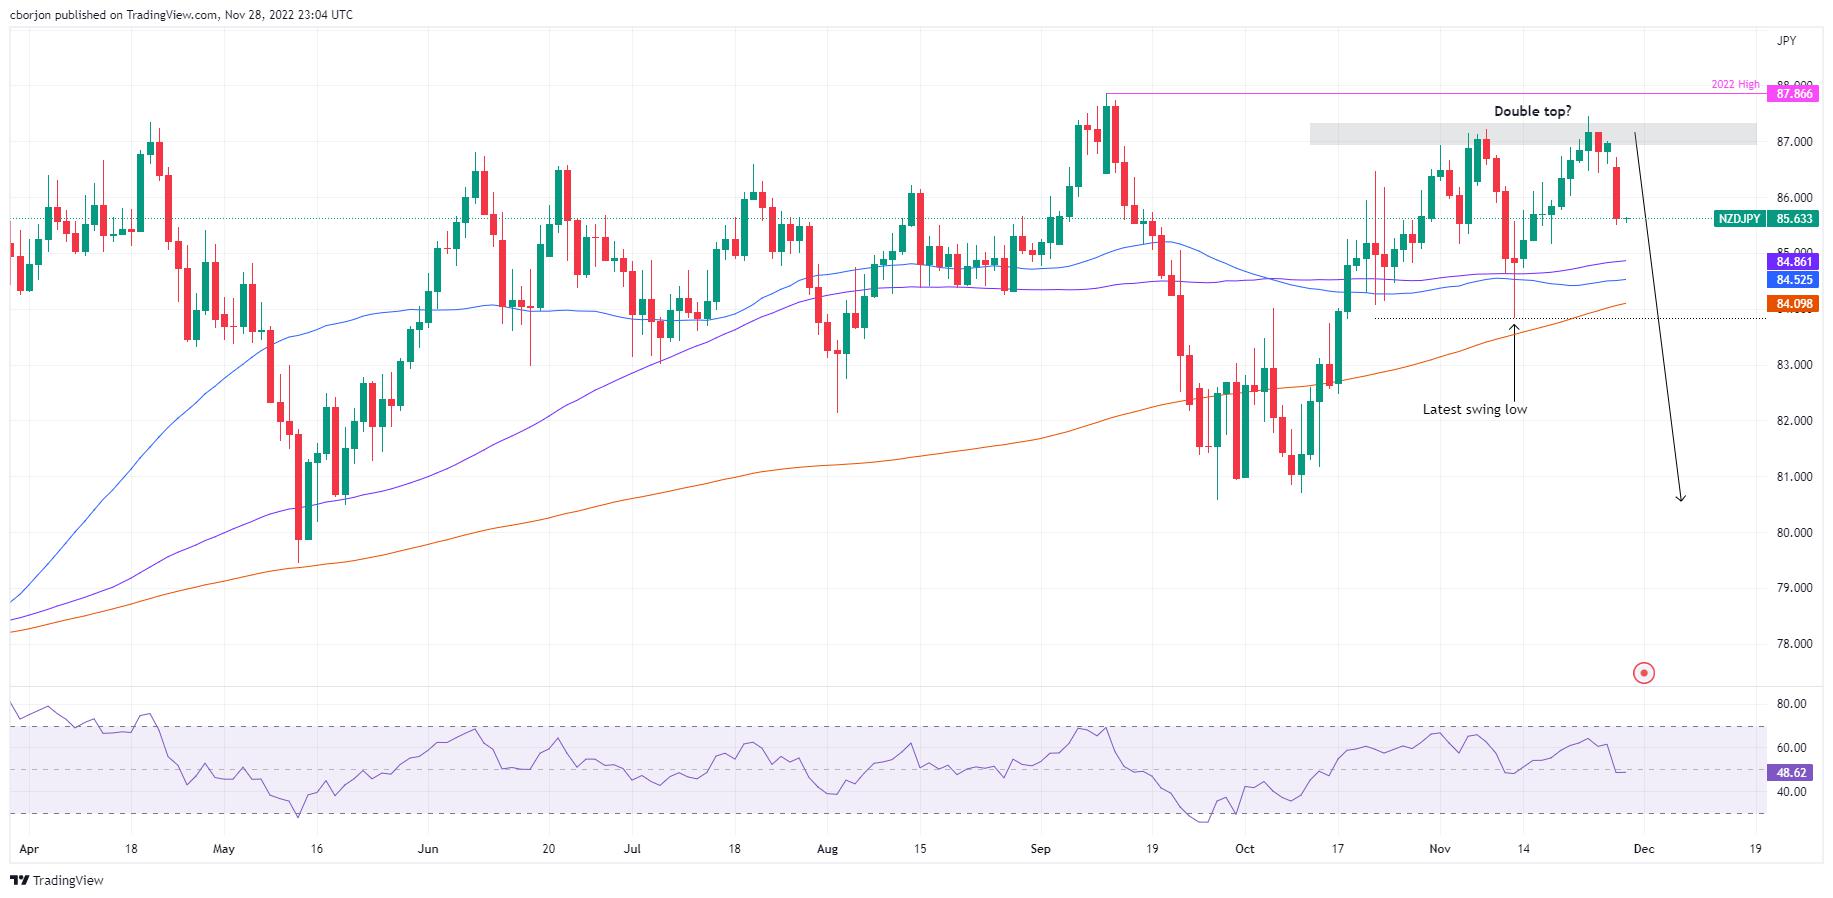 NZD/JPY Price Analysis: Double top in the daily chart, targets a fall to 80.50